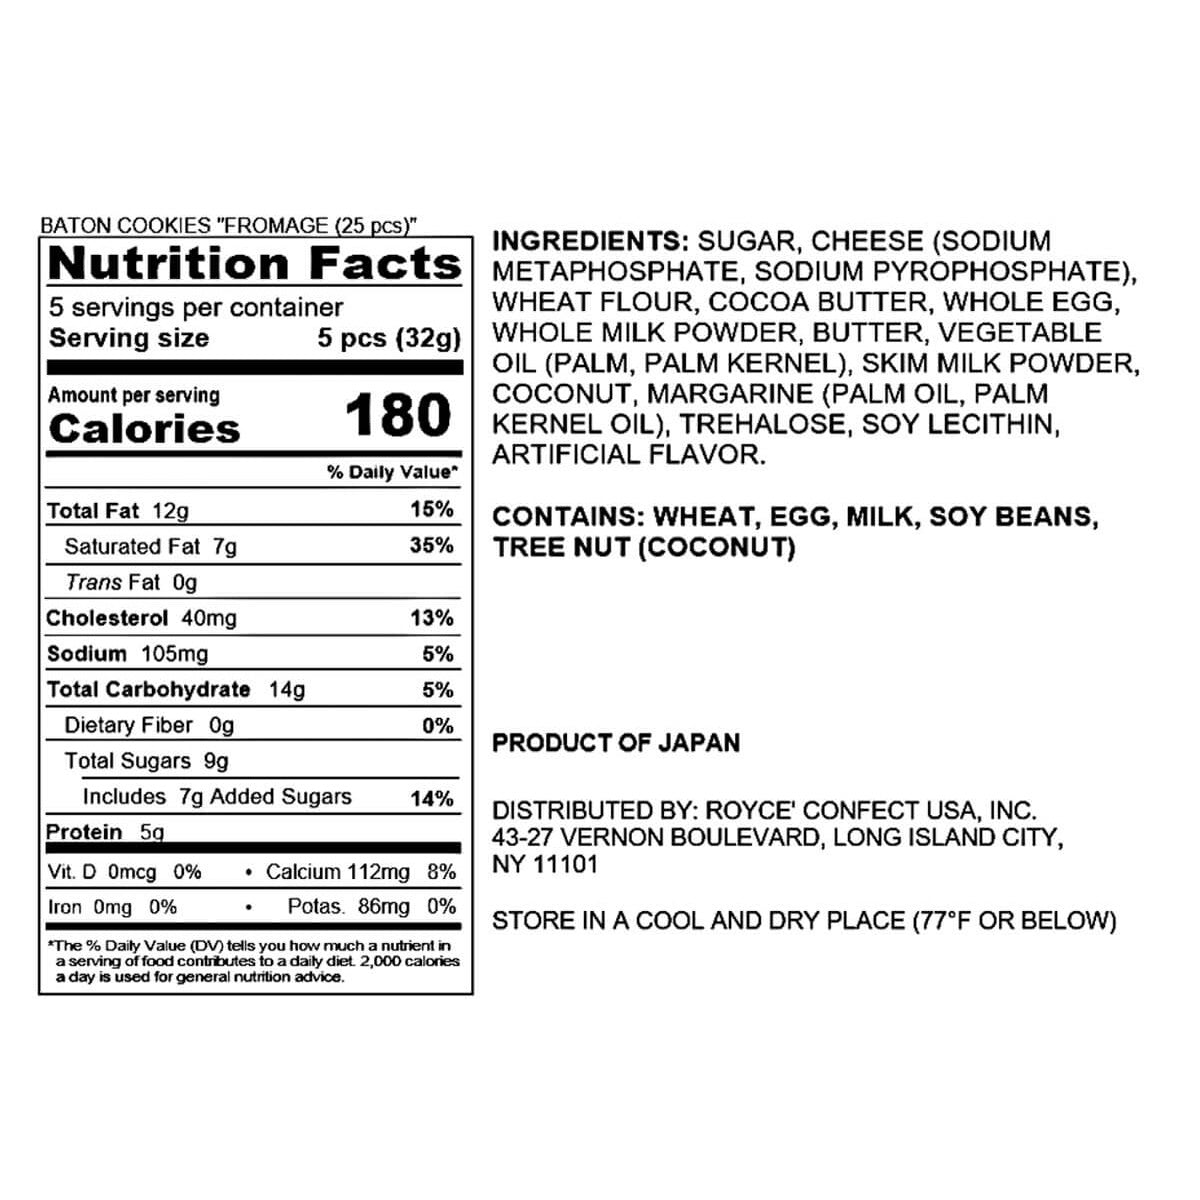 ROYCE' Chocolate - Baton Cookies "Fromage (25 Pcs)" - Nutrition Facts